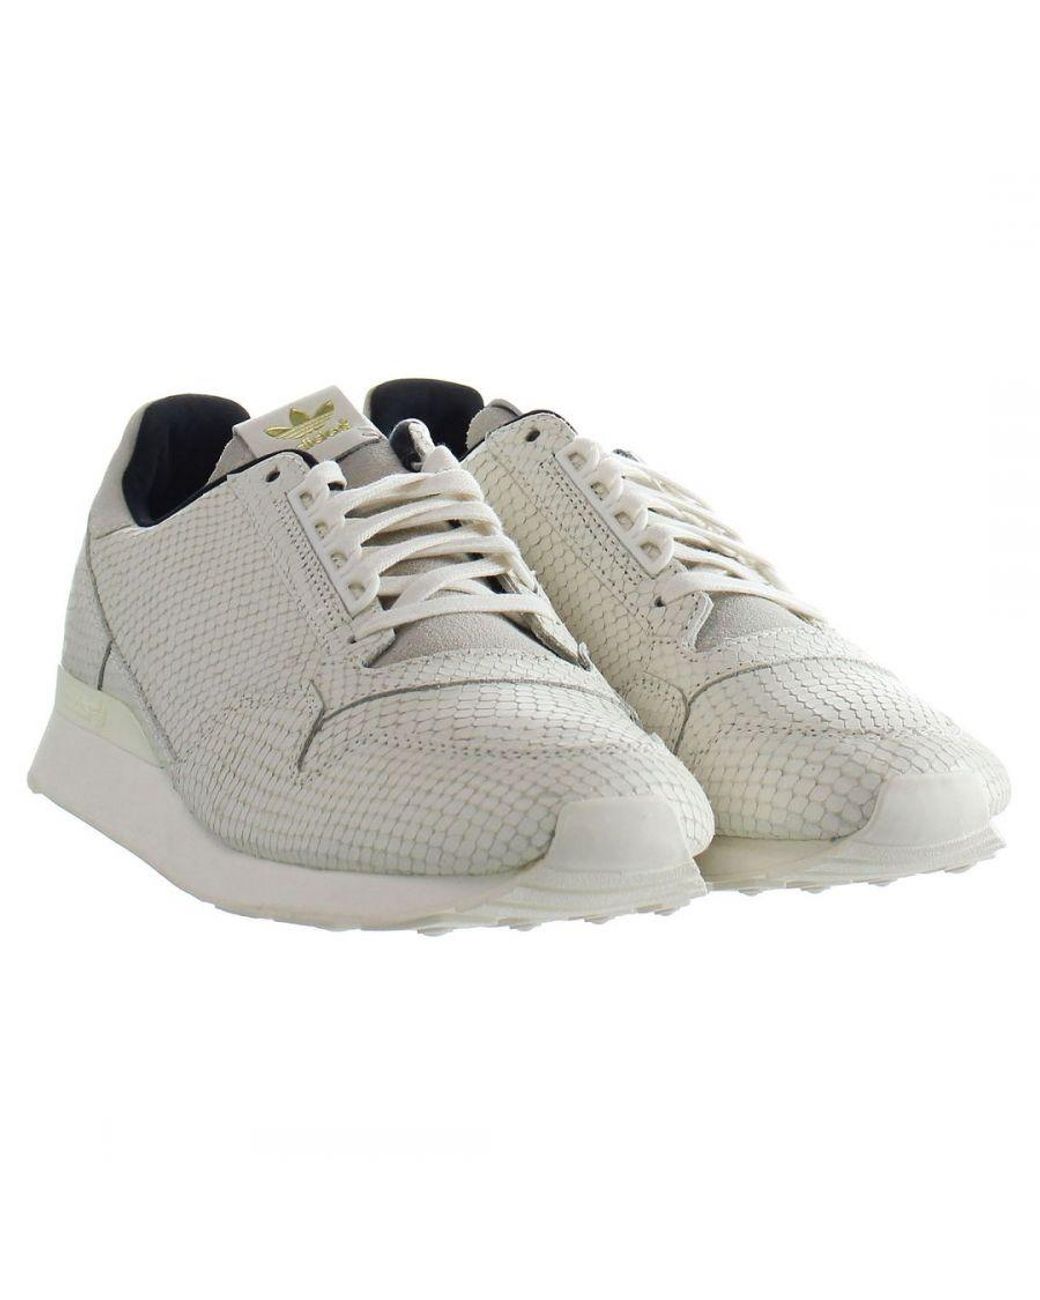 adidas Zx 500 Og Snake Off White Trainers Leather in Grey | Lyst UK